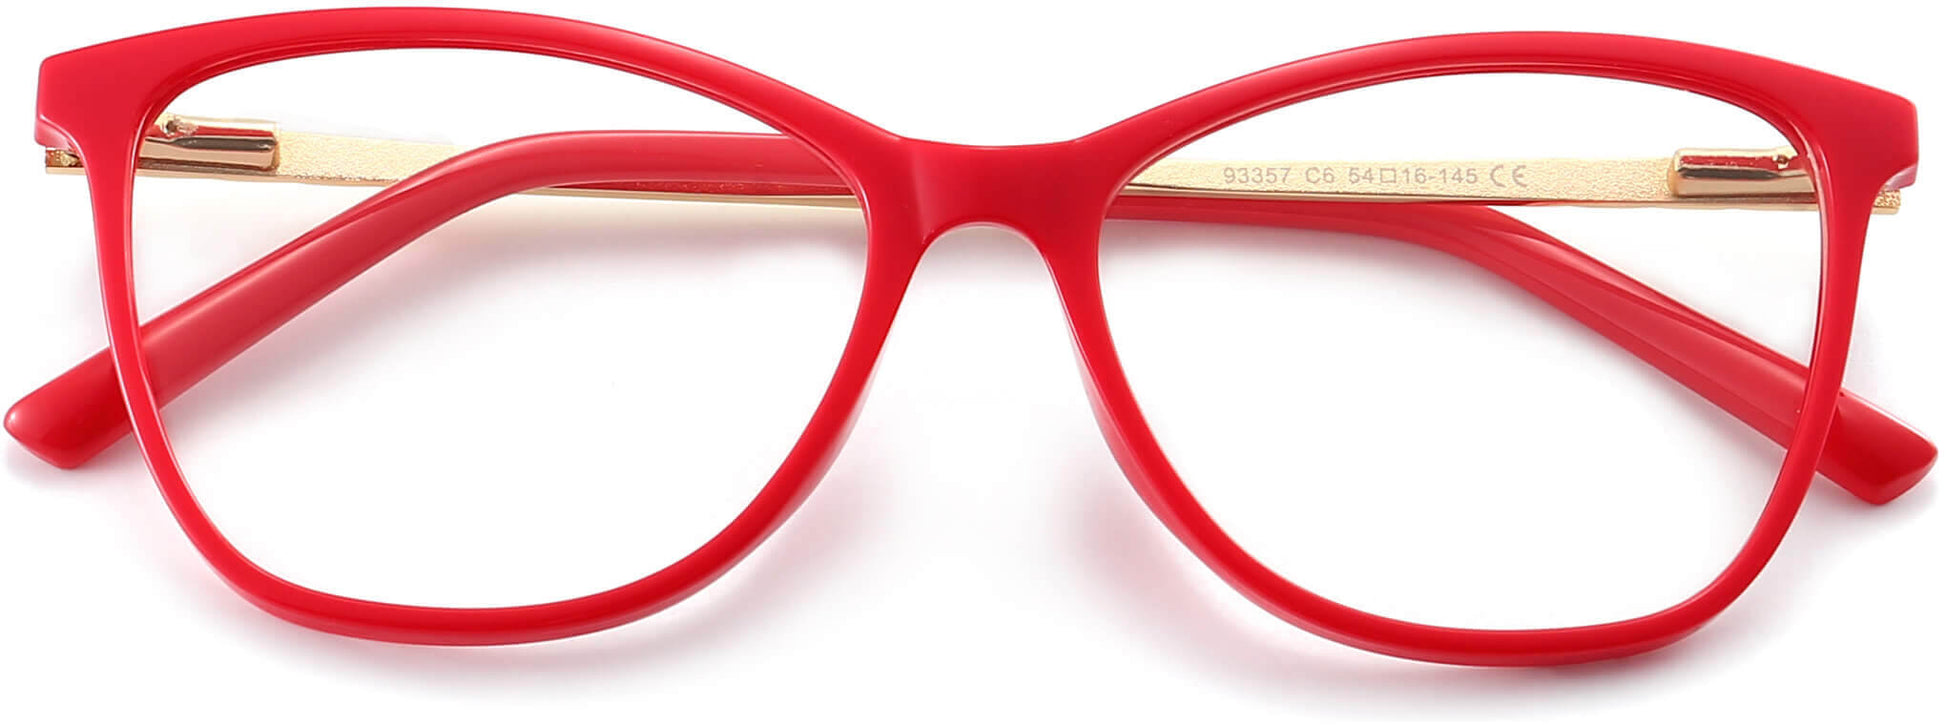 Roella Cateye Red Eyeglasses from ANRRI, closed view